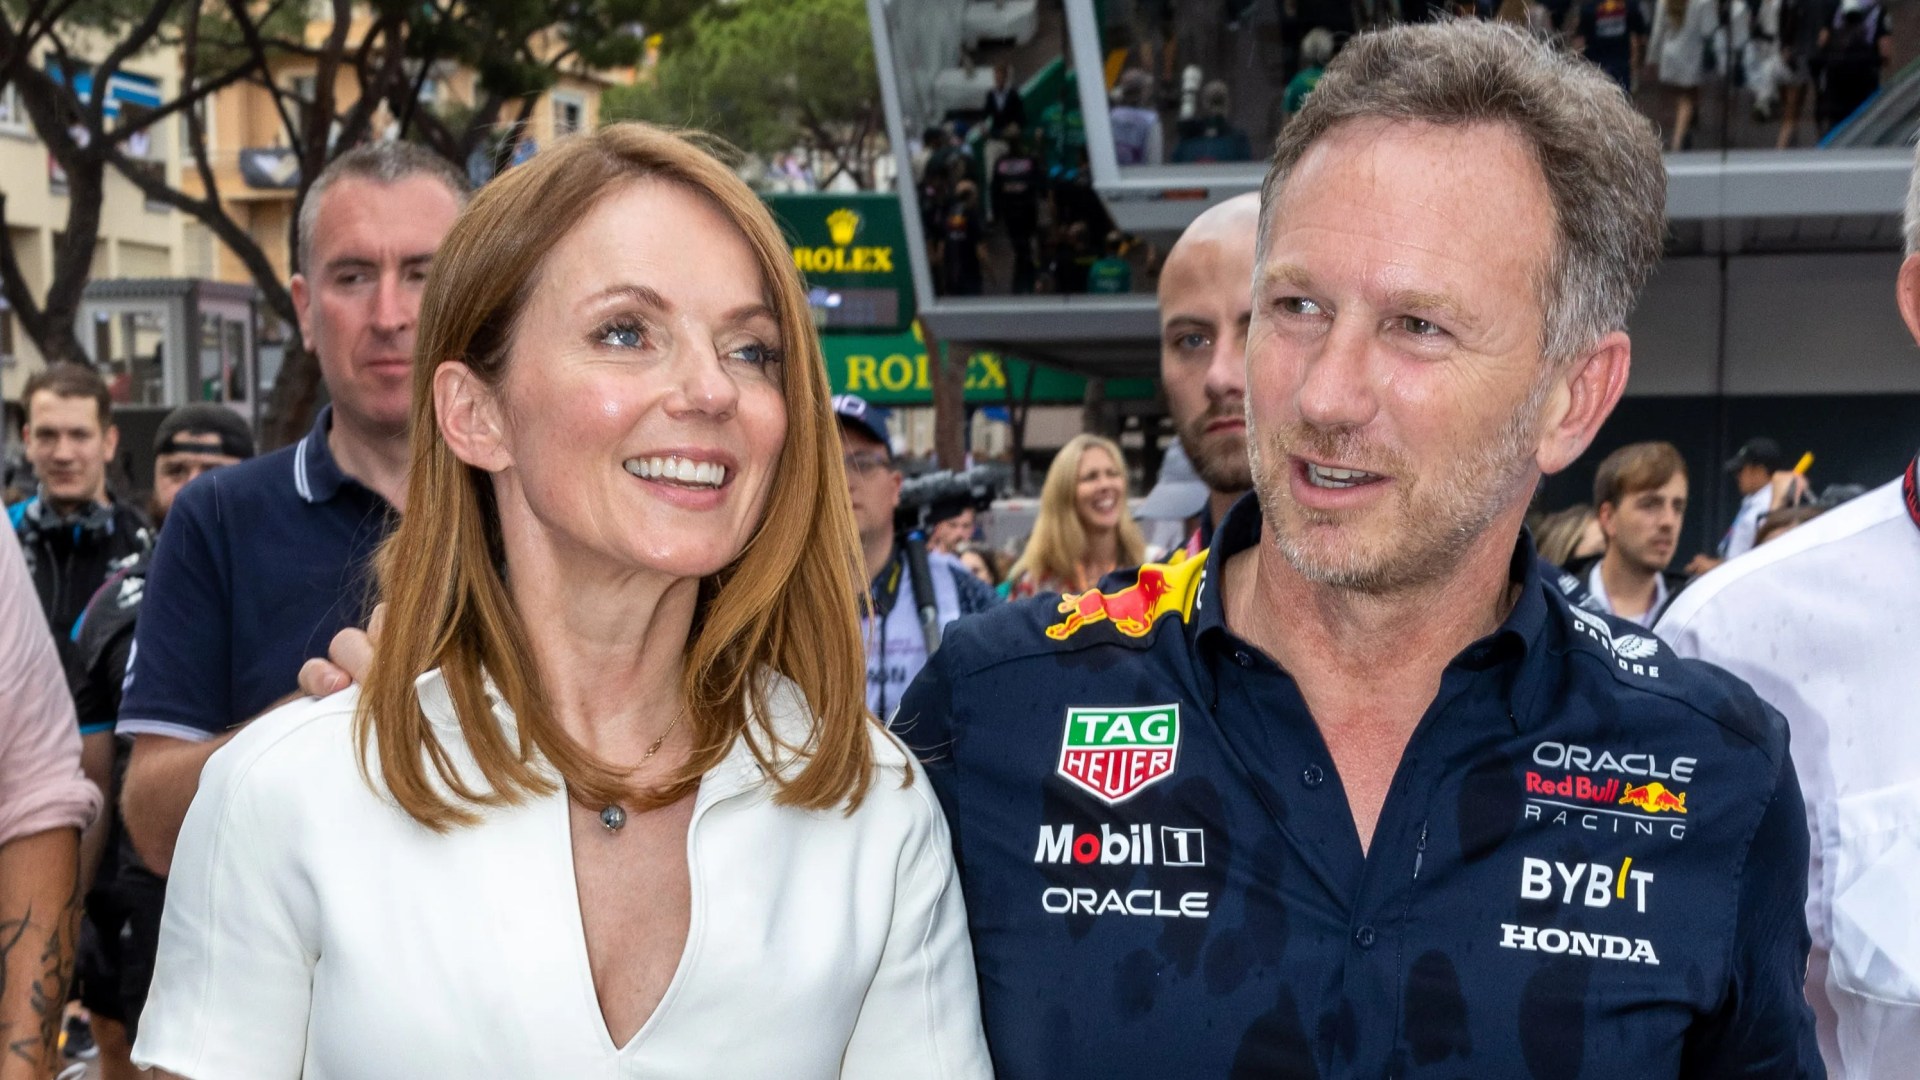 Will the story of Geri Halliwells marriage be one of survival against the odds or a casualty of ongoing mistrust? [Video]